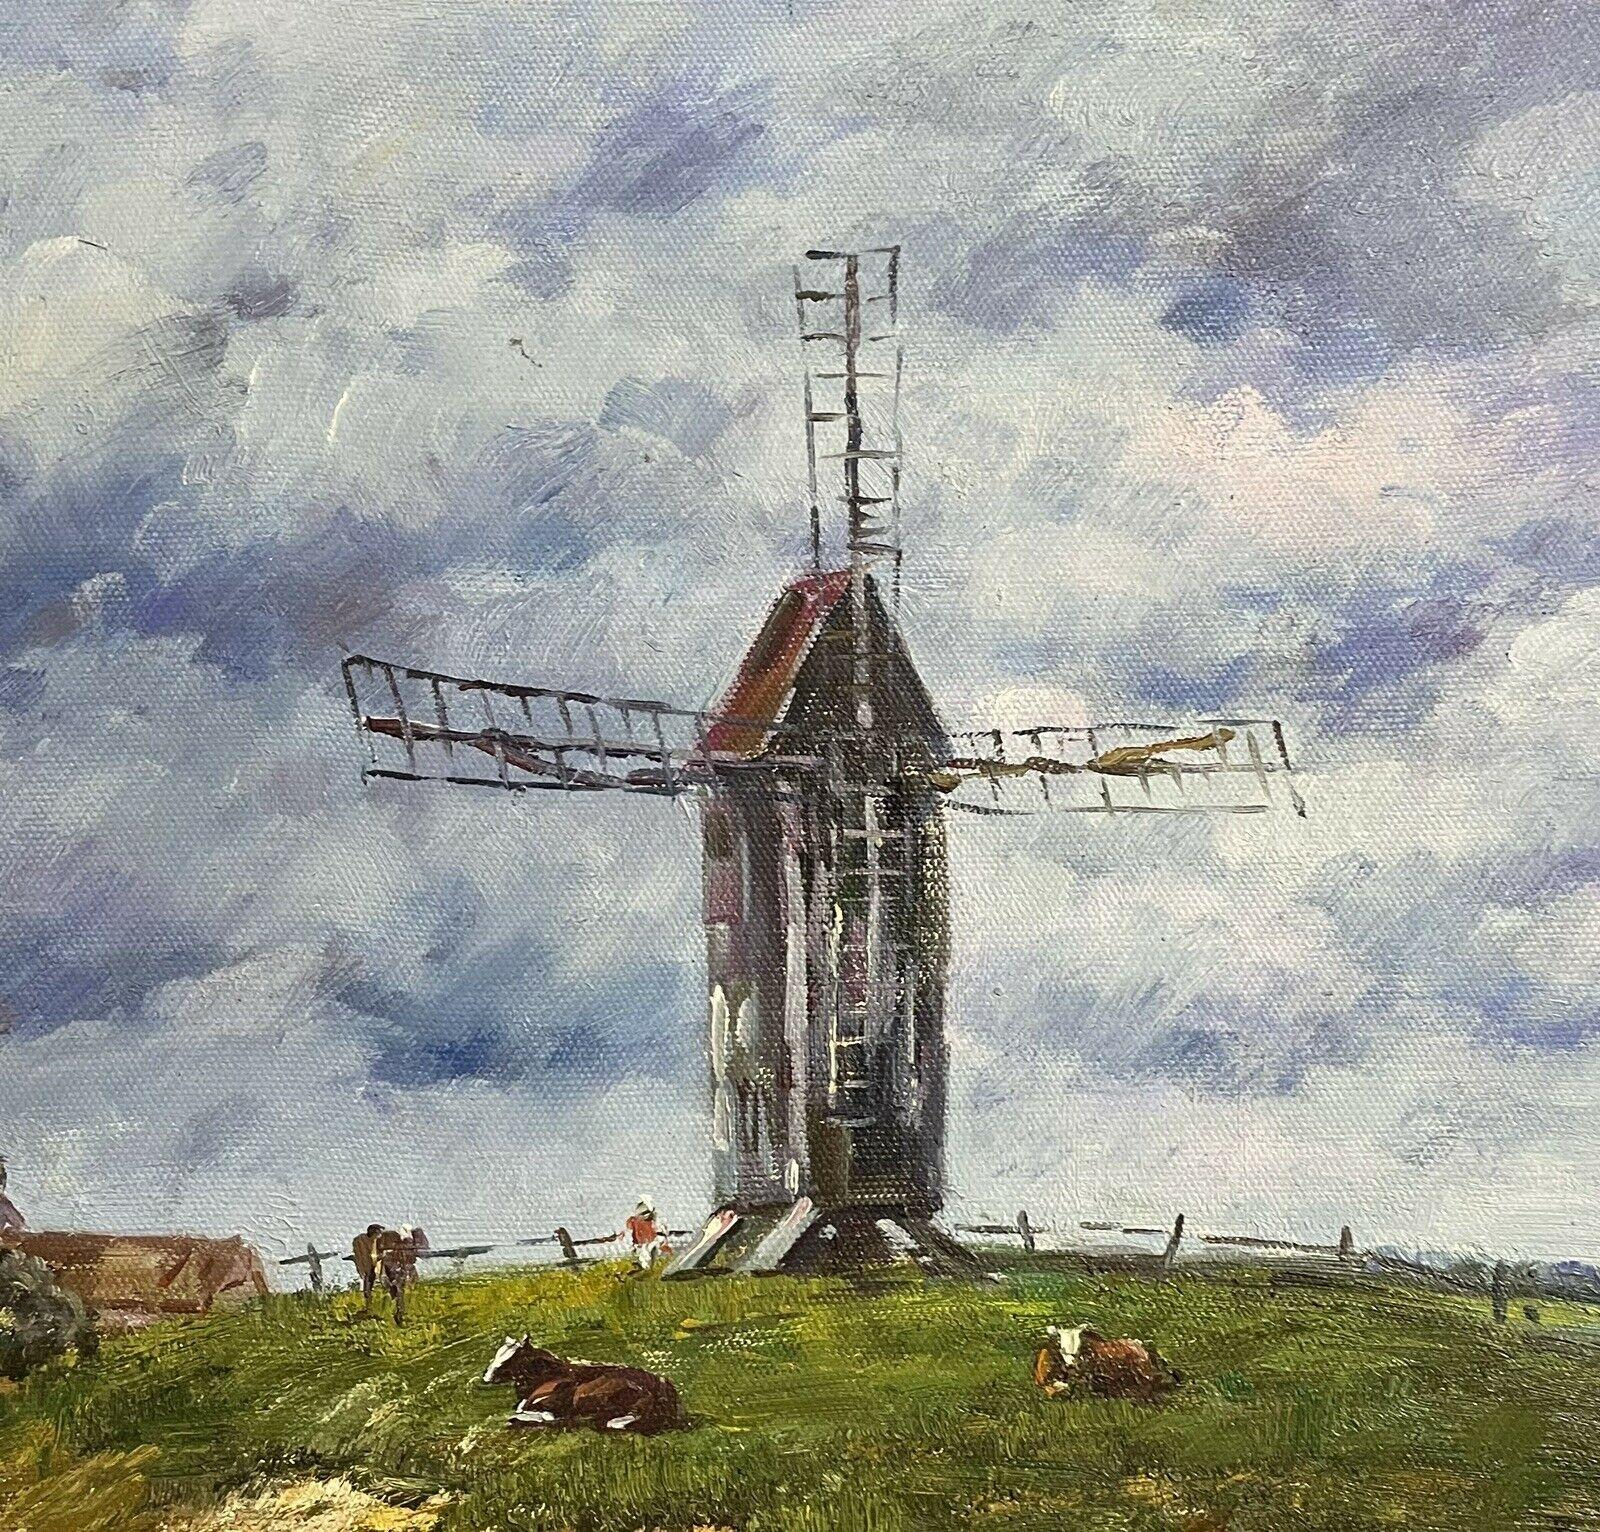 SIGNED FRENCH IMPRESSIONIST OIL PAINTING - WINDMILL IN RURAL FARM LANDSCAPE - Impressionist Painting by Unknown